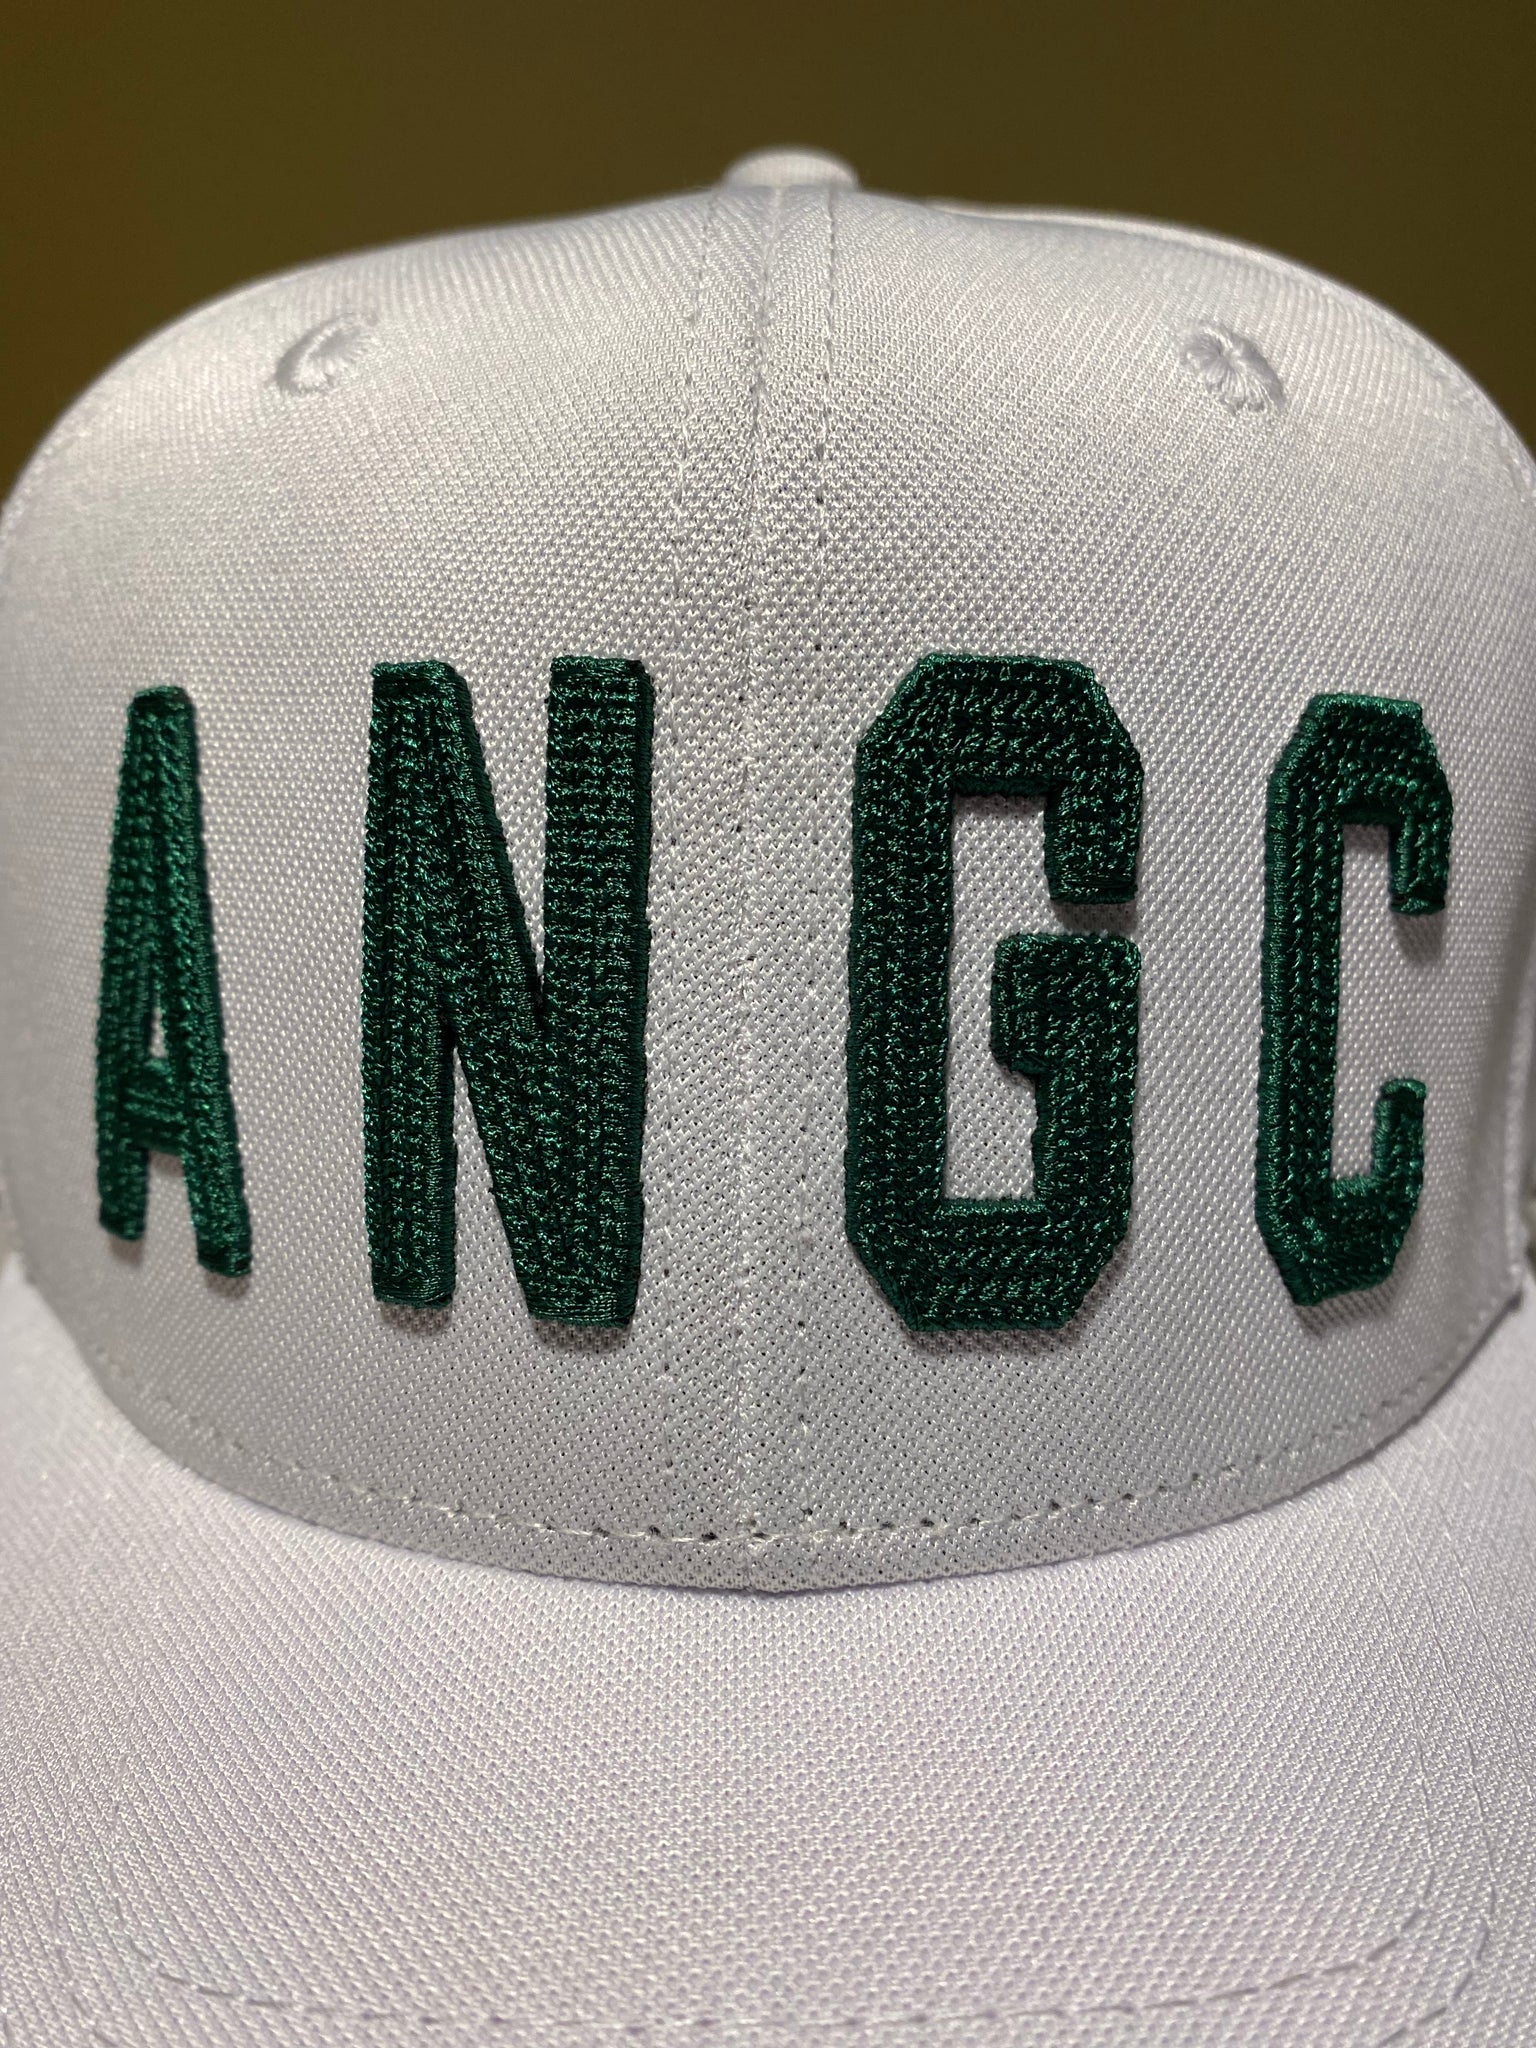 ANGC - *Arkansas Natural Golf Club* Raised Chainstitched Hat - White